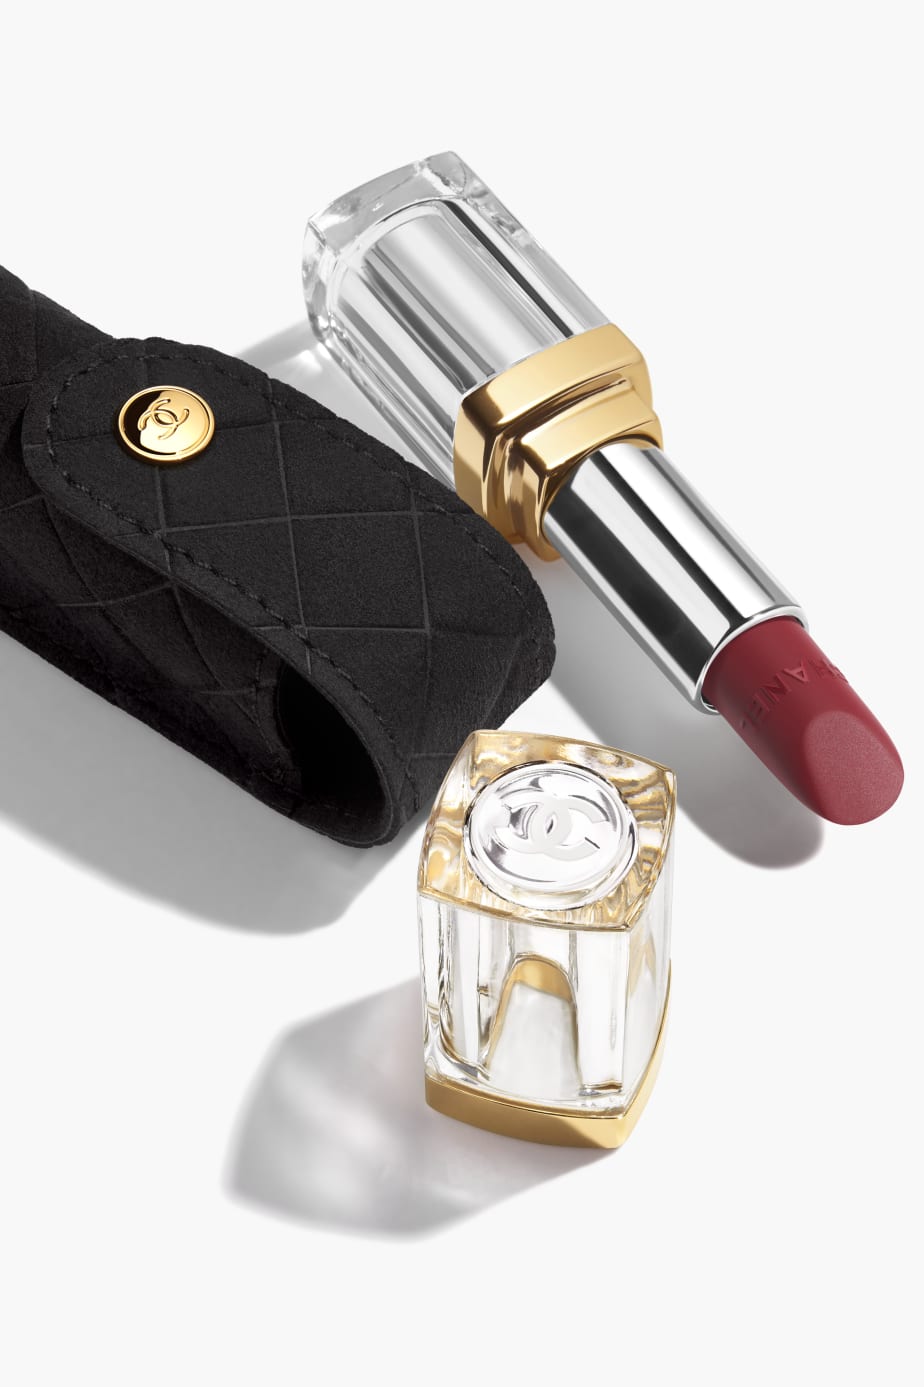 Son CHANEL 31 Le Rouge #9 Rouge Tailleur - Raspberry